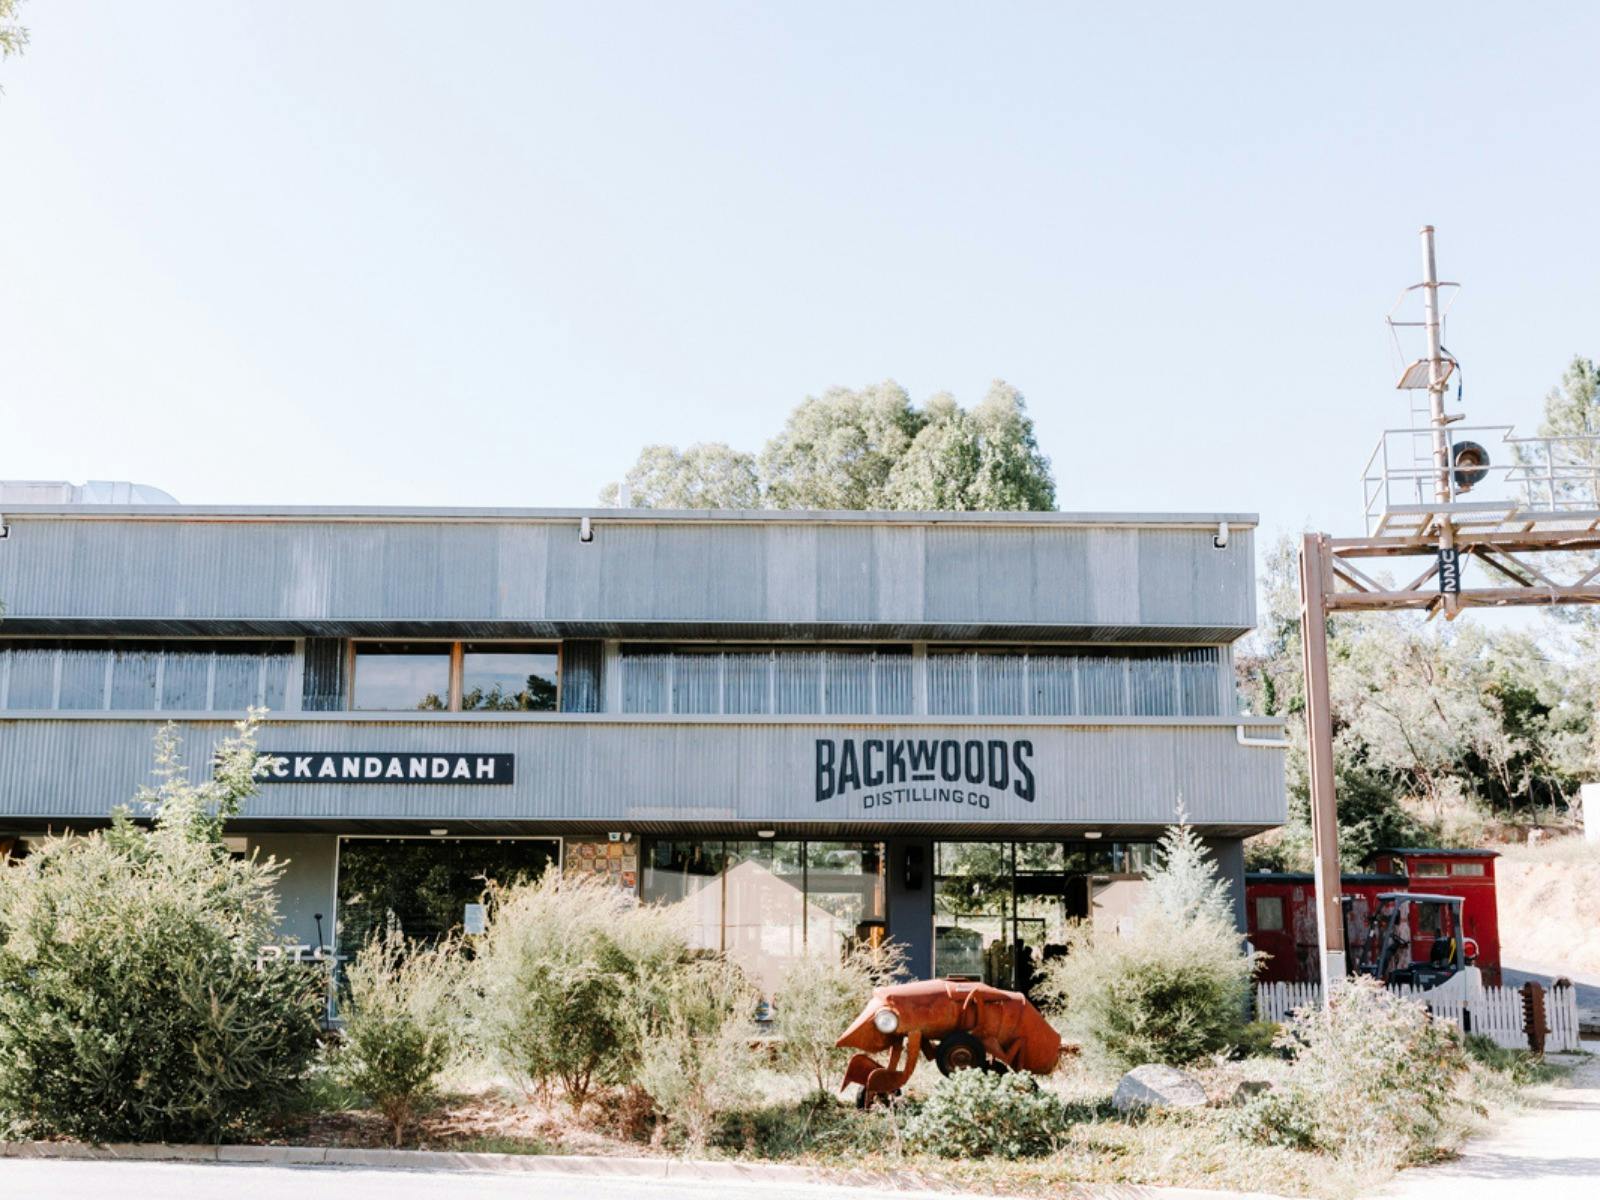 A shot of the external view of Backwoods Distilling Co